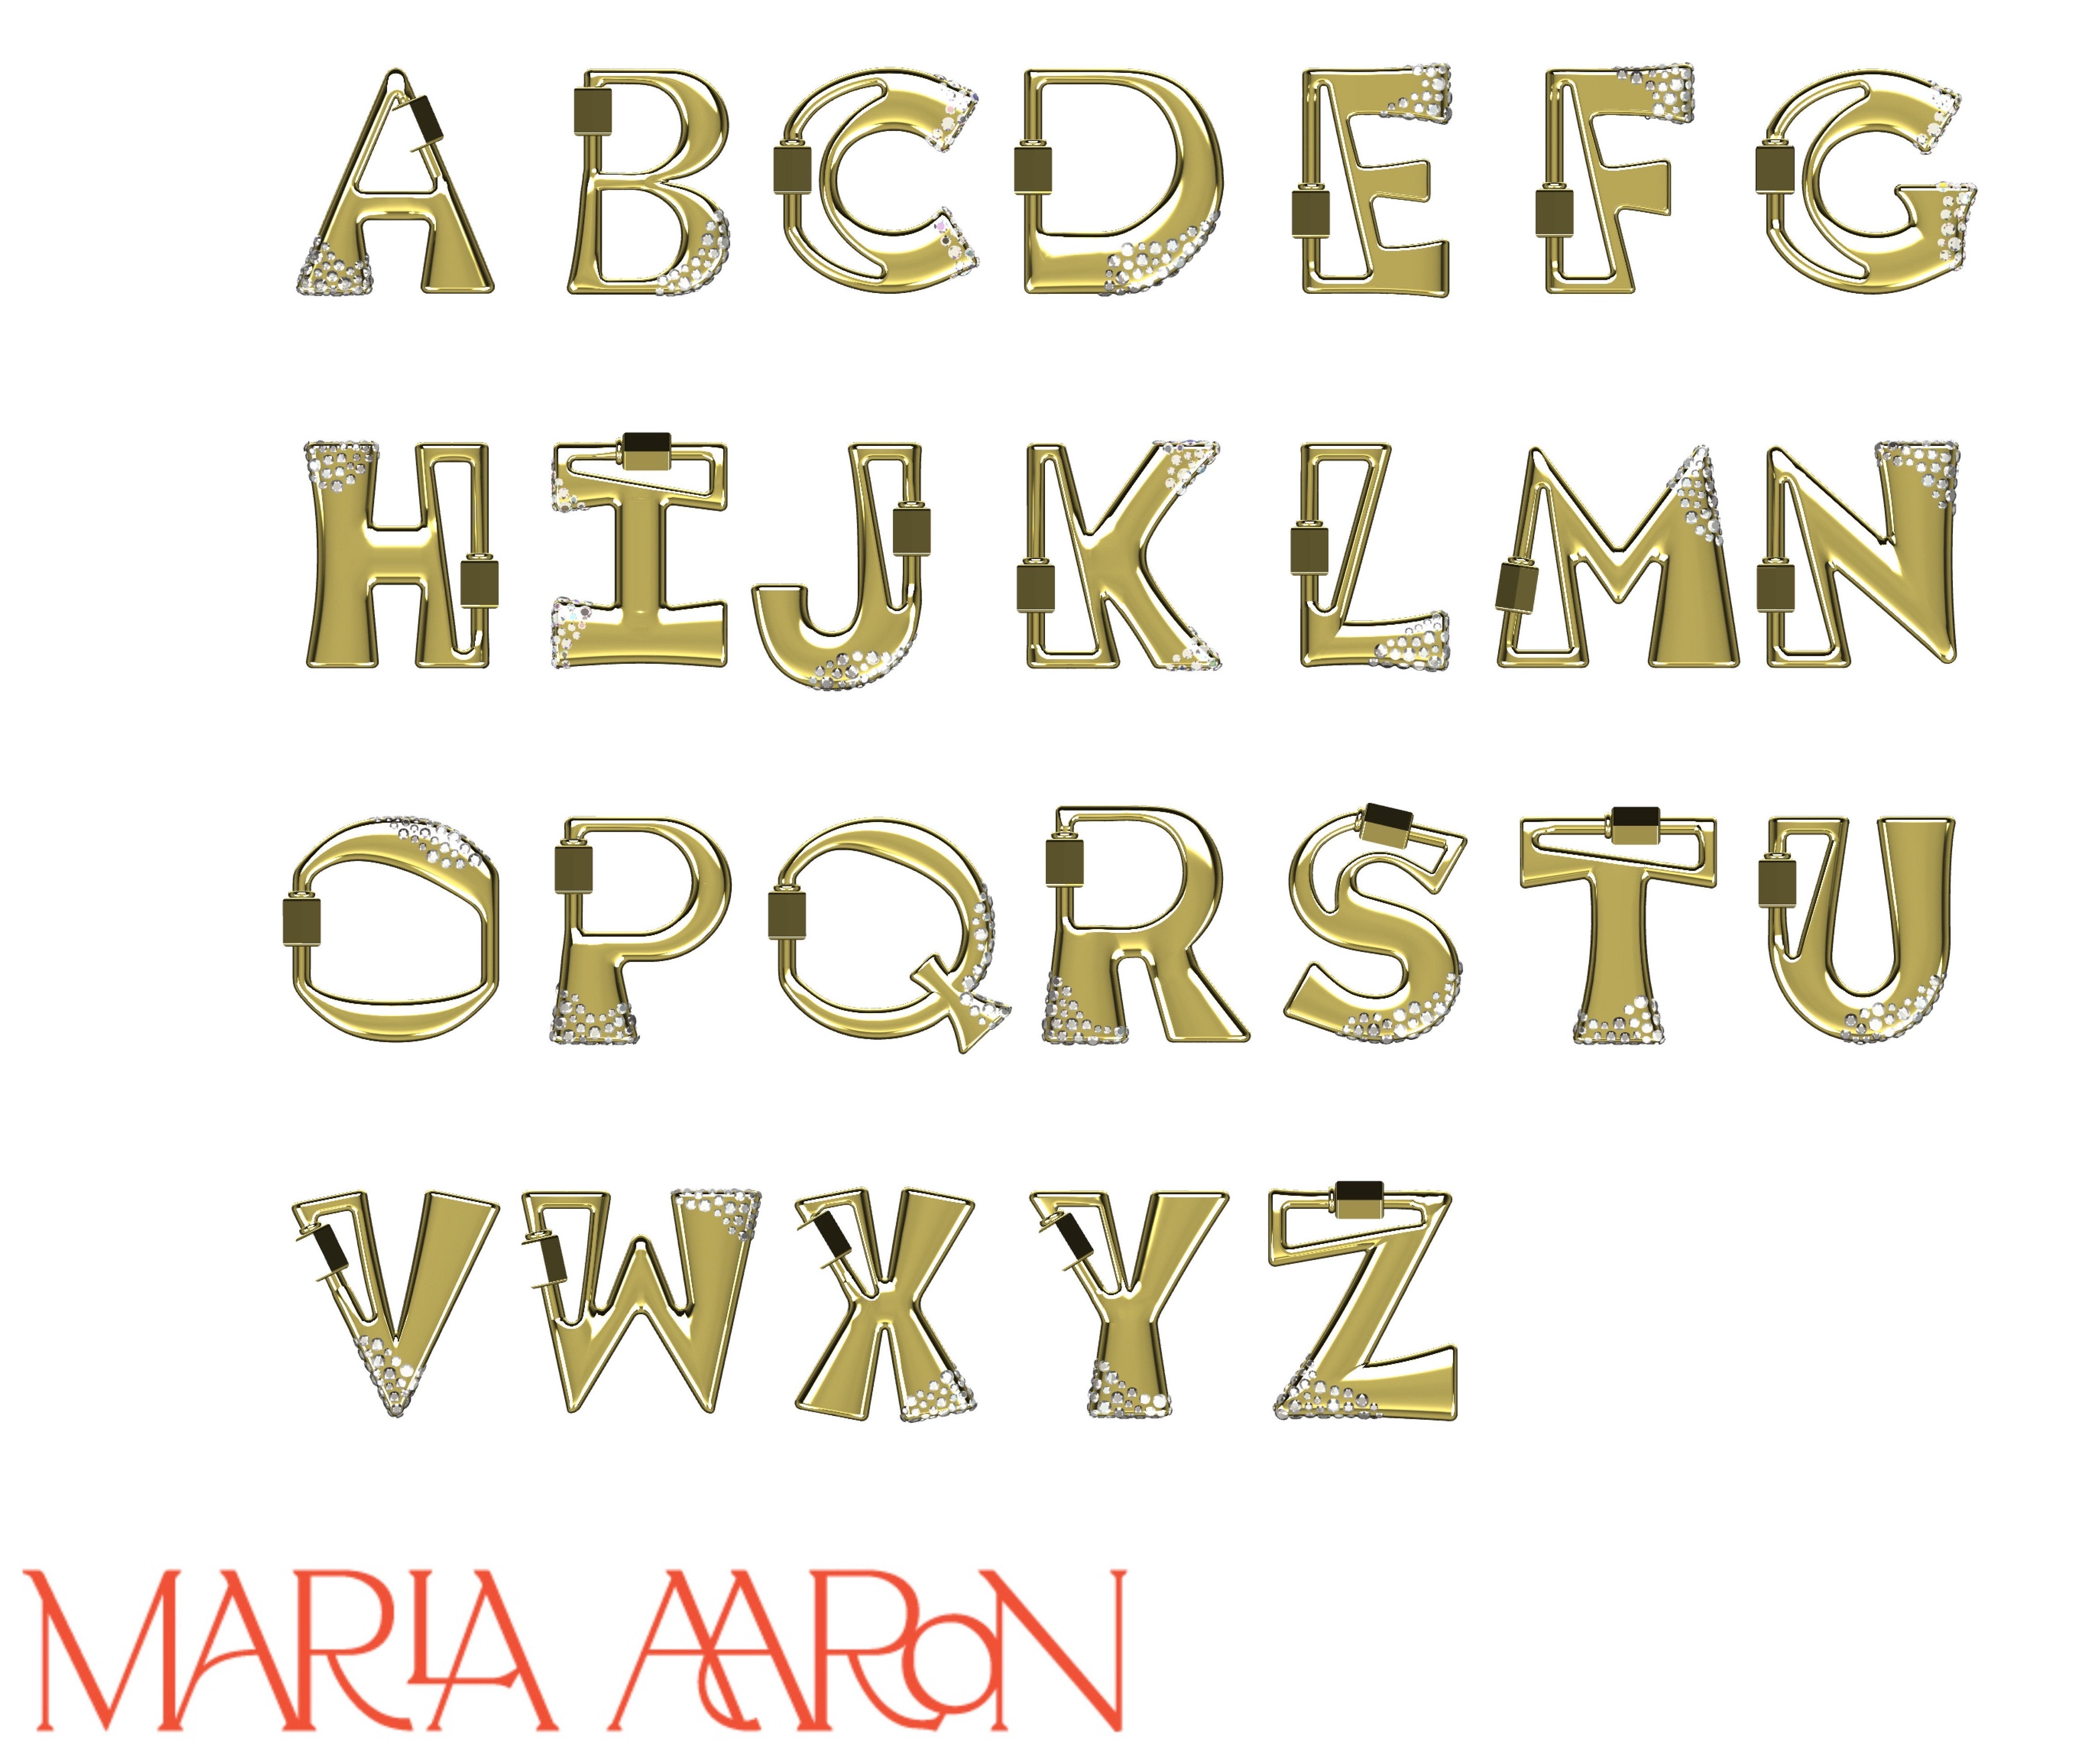 Gold locks of every letter of the alphabet including R charm against white backdrop with Marla Aaron logo in bottom left corner